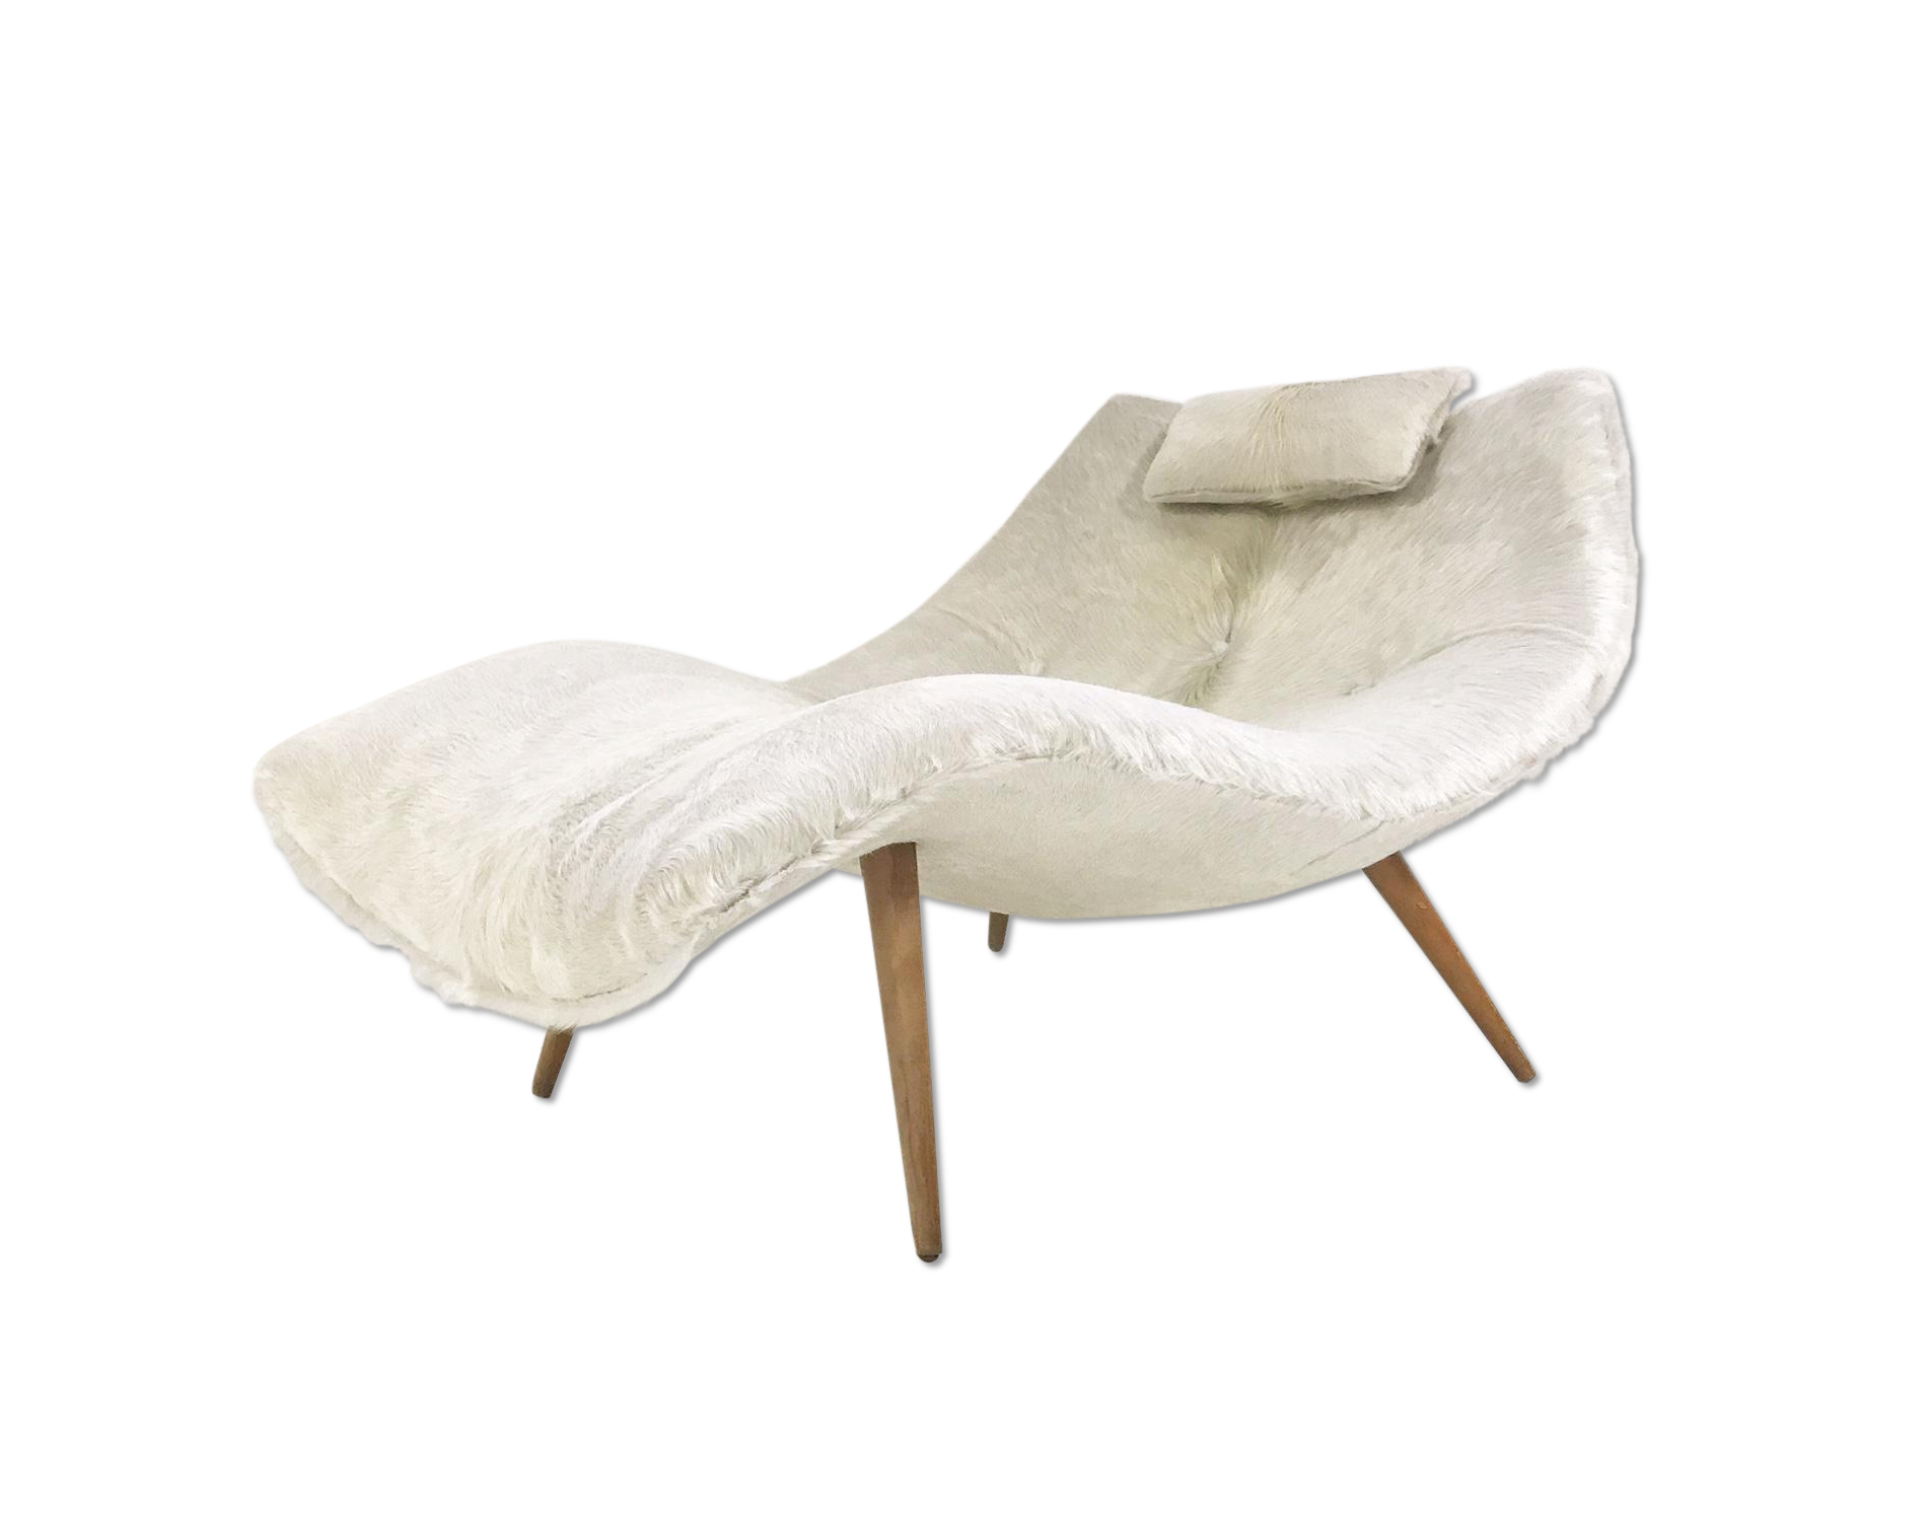 1828 C Chaise Lounge in Brazilian Cowhide - FORSYTH